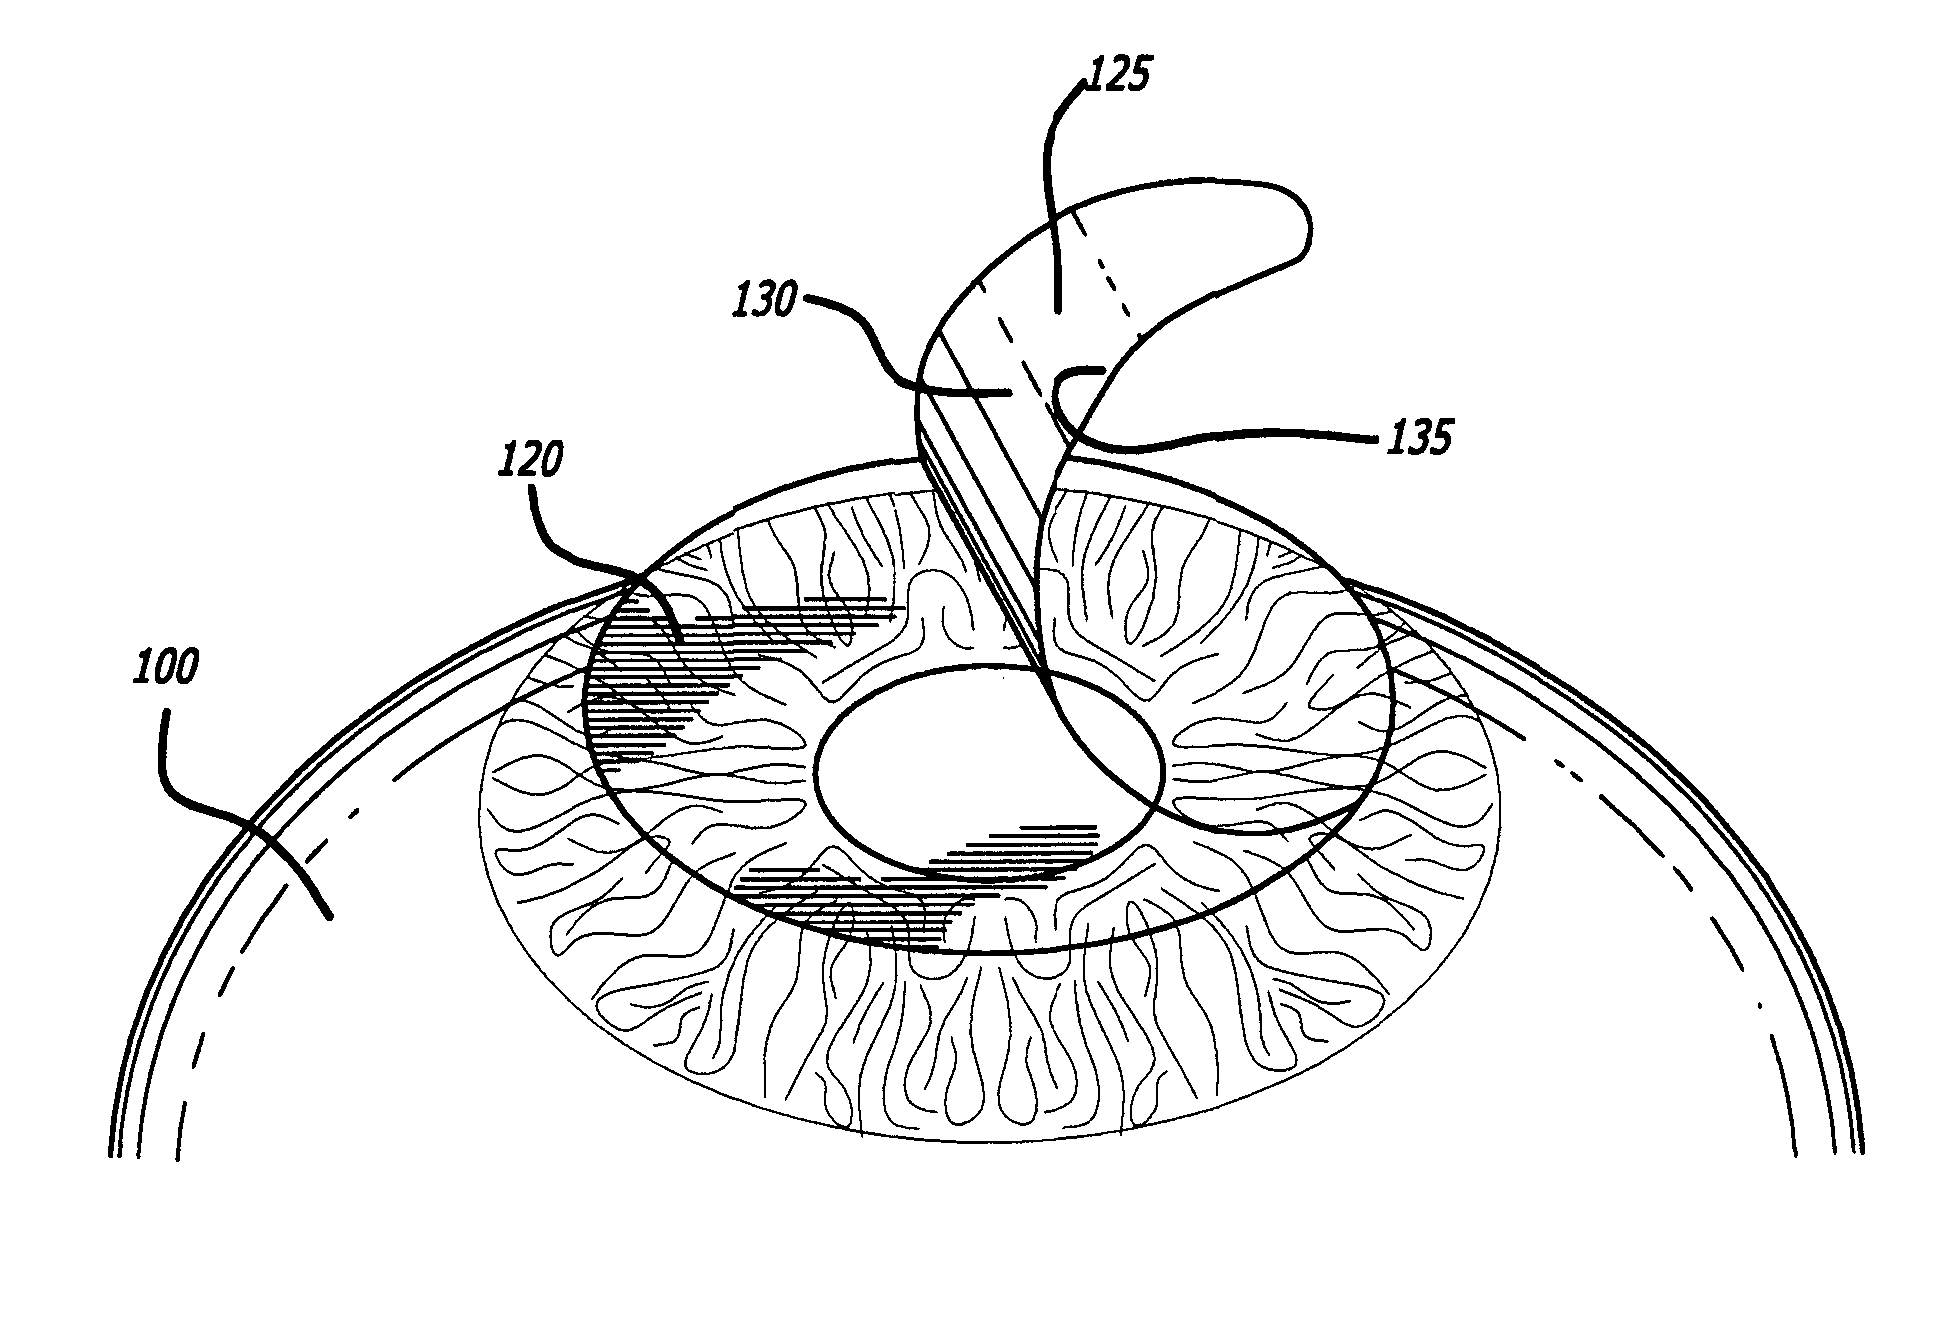 Method of correcting vision problems using only a photodisruption laser